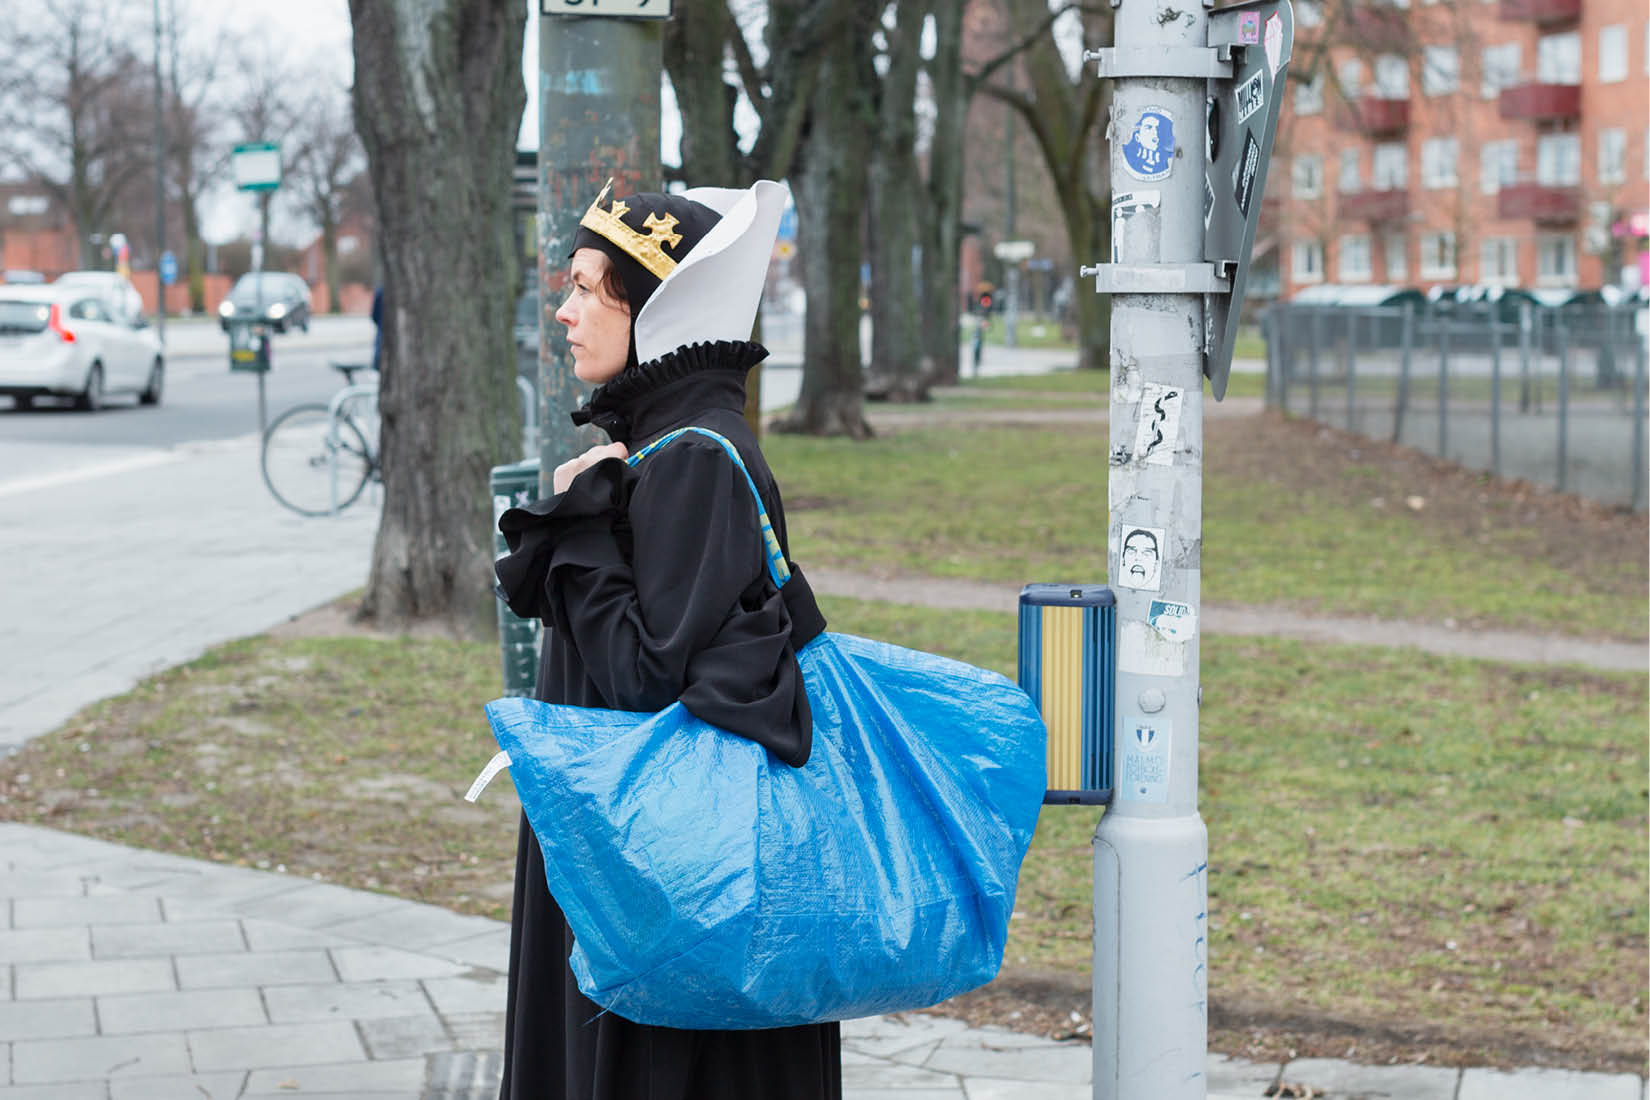 Liv Strömquist is standing in the street, showing her profile, in a long black dress, wearing a crown and a big blue Ikea bag on her shoulder.